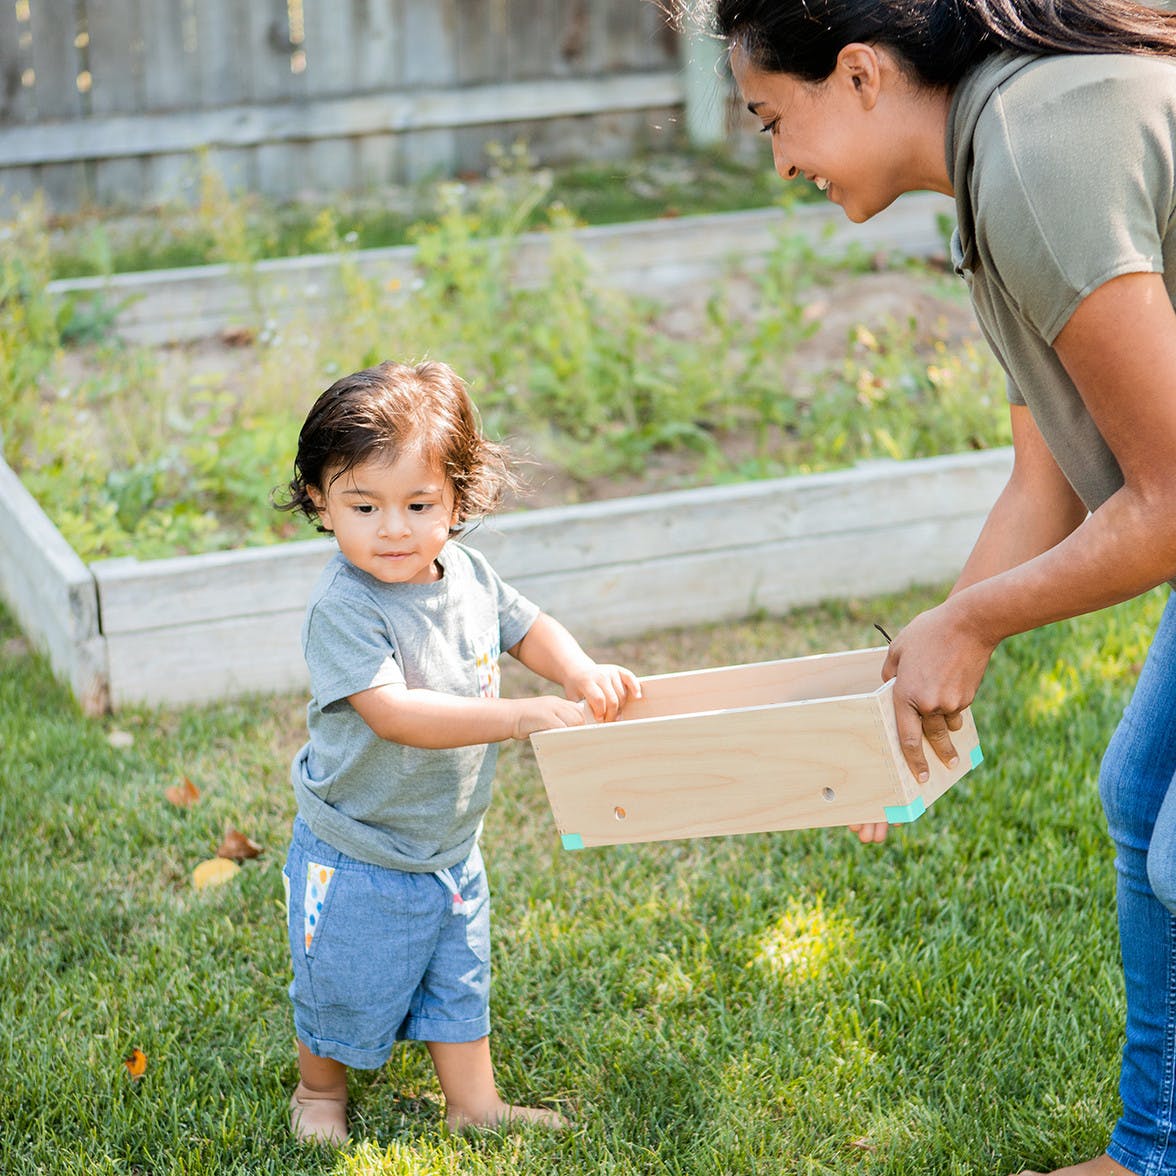 Woman and toddler carrying a wooden box together outside